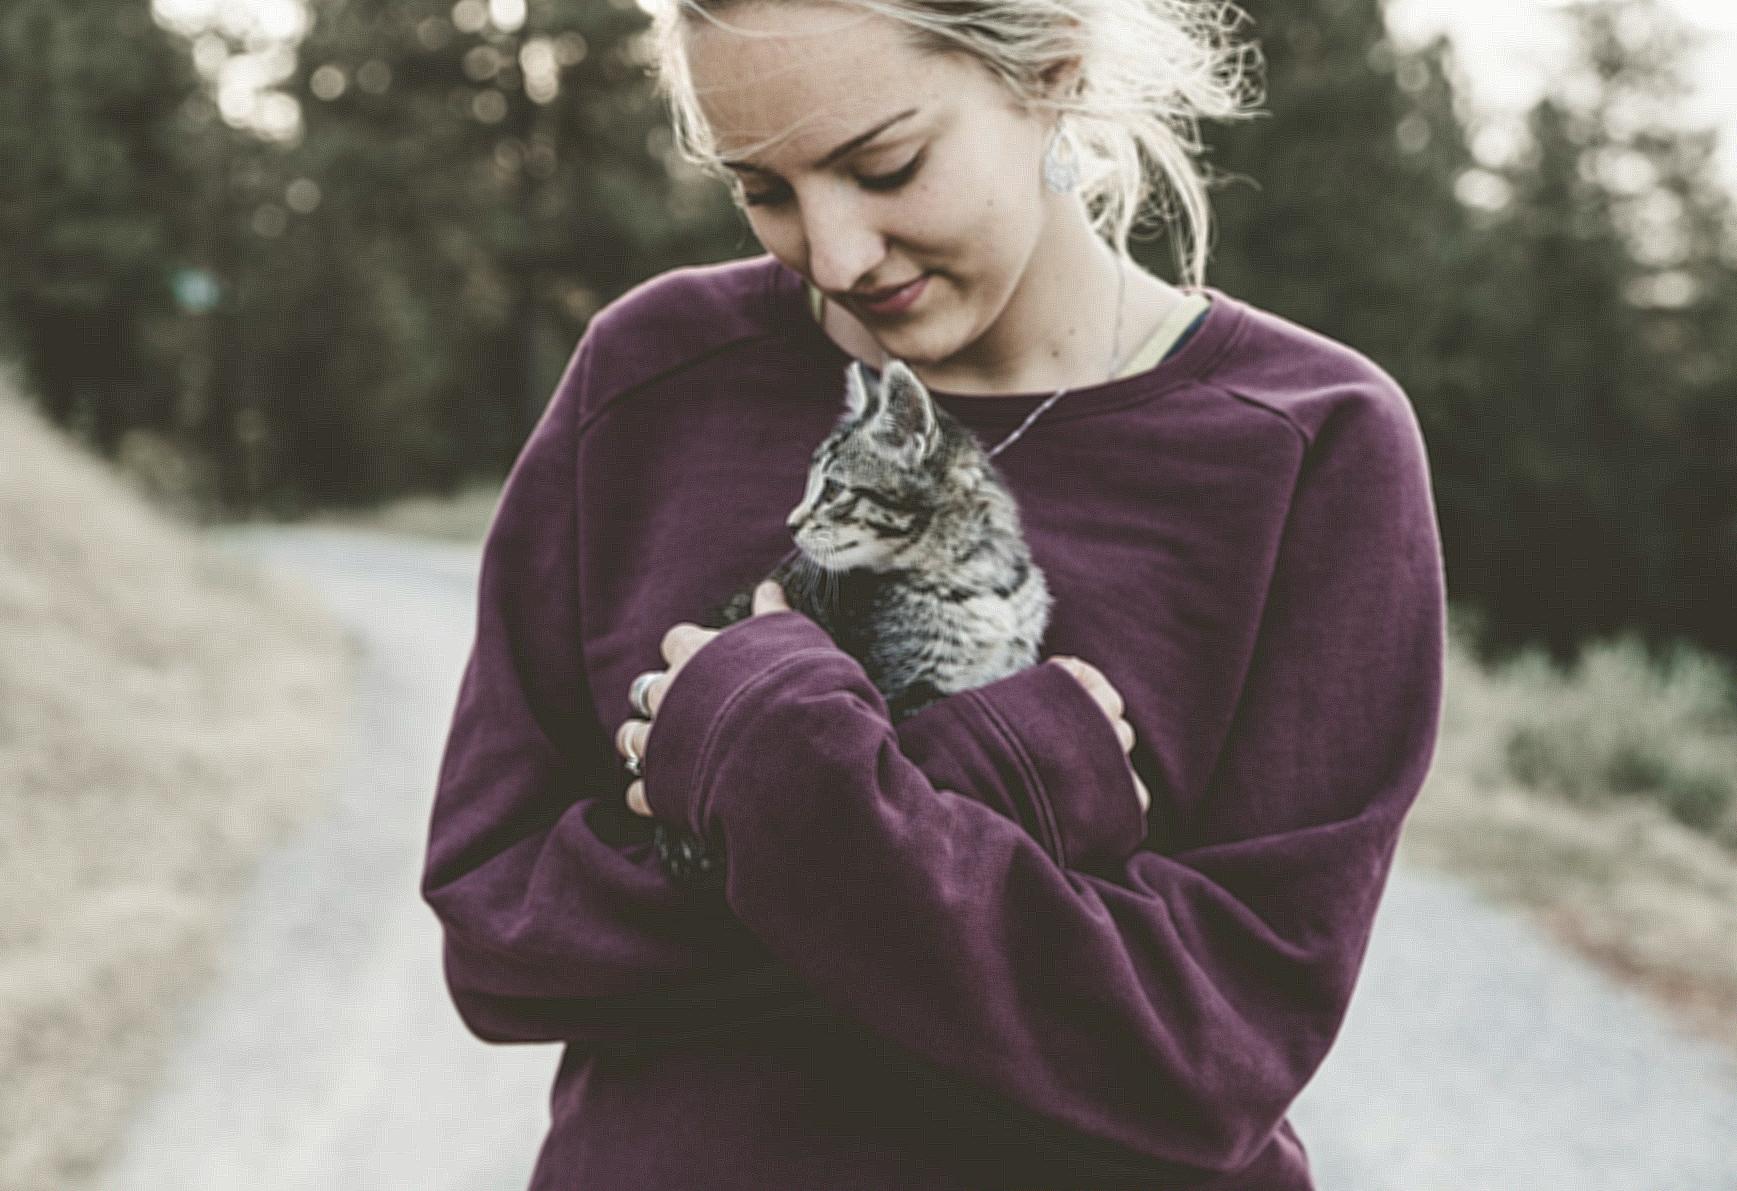 Selective Focus Photography of Woman Wearing Purple Sweater Holding Silver Tabby Cat